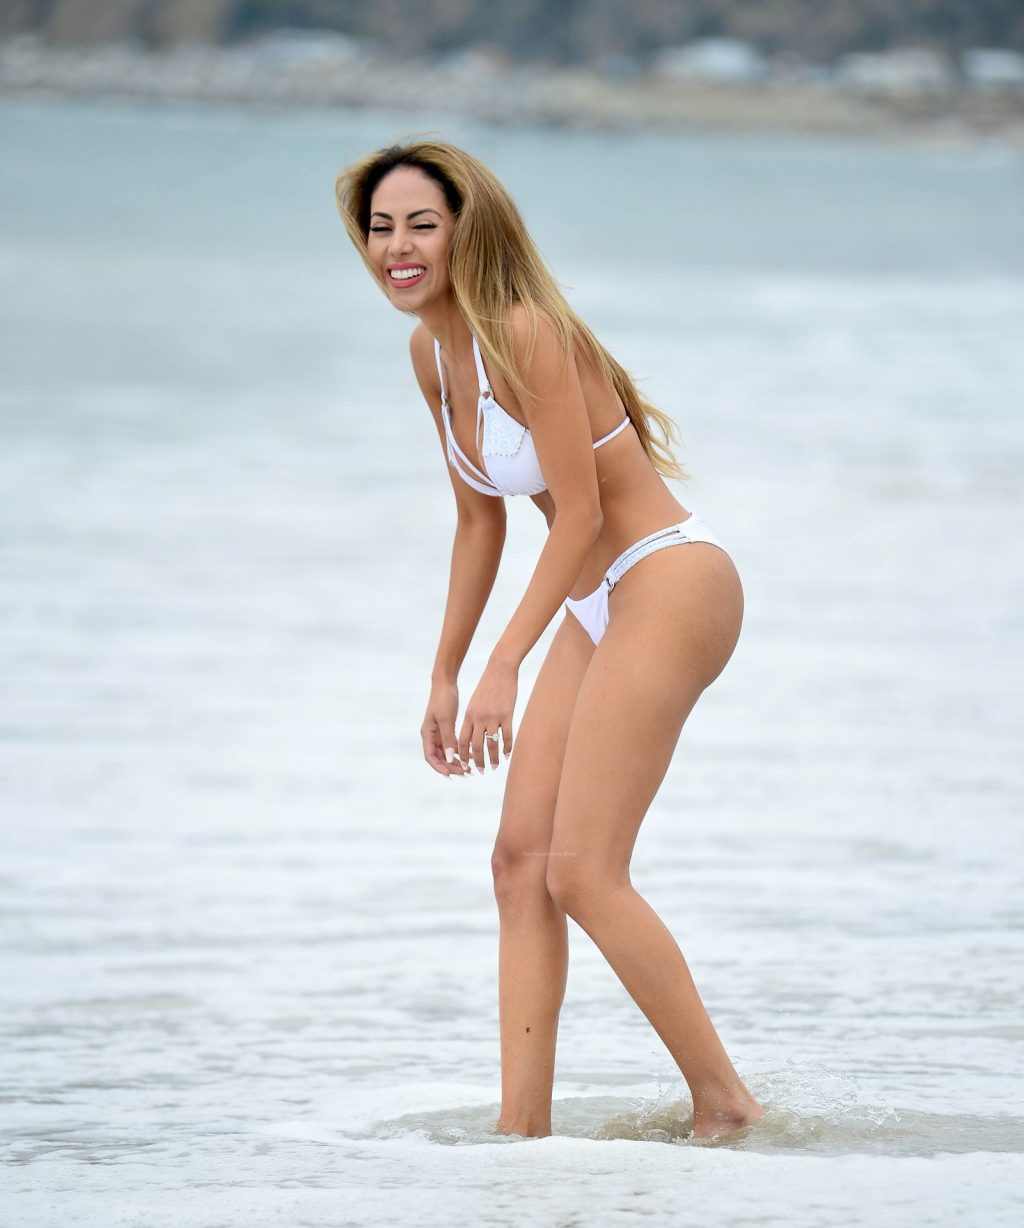 Esther Anaya Shows Off Her Beach Ready Body During a Photoshoot in Malibu (58 Photos)